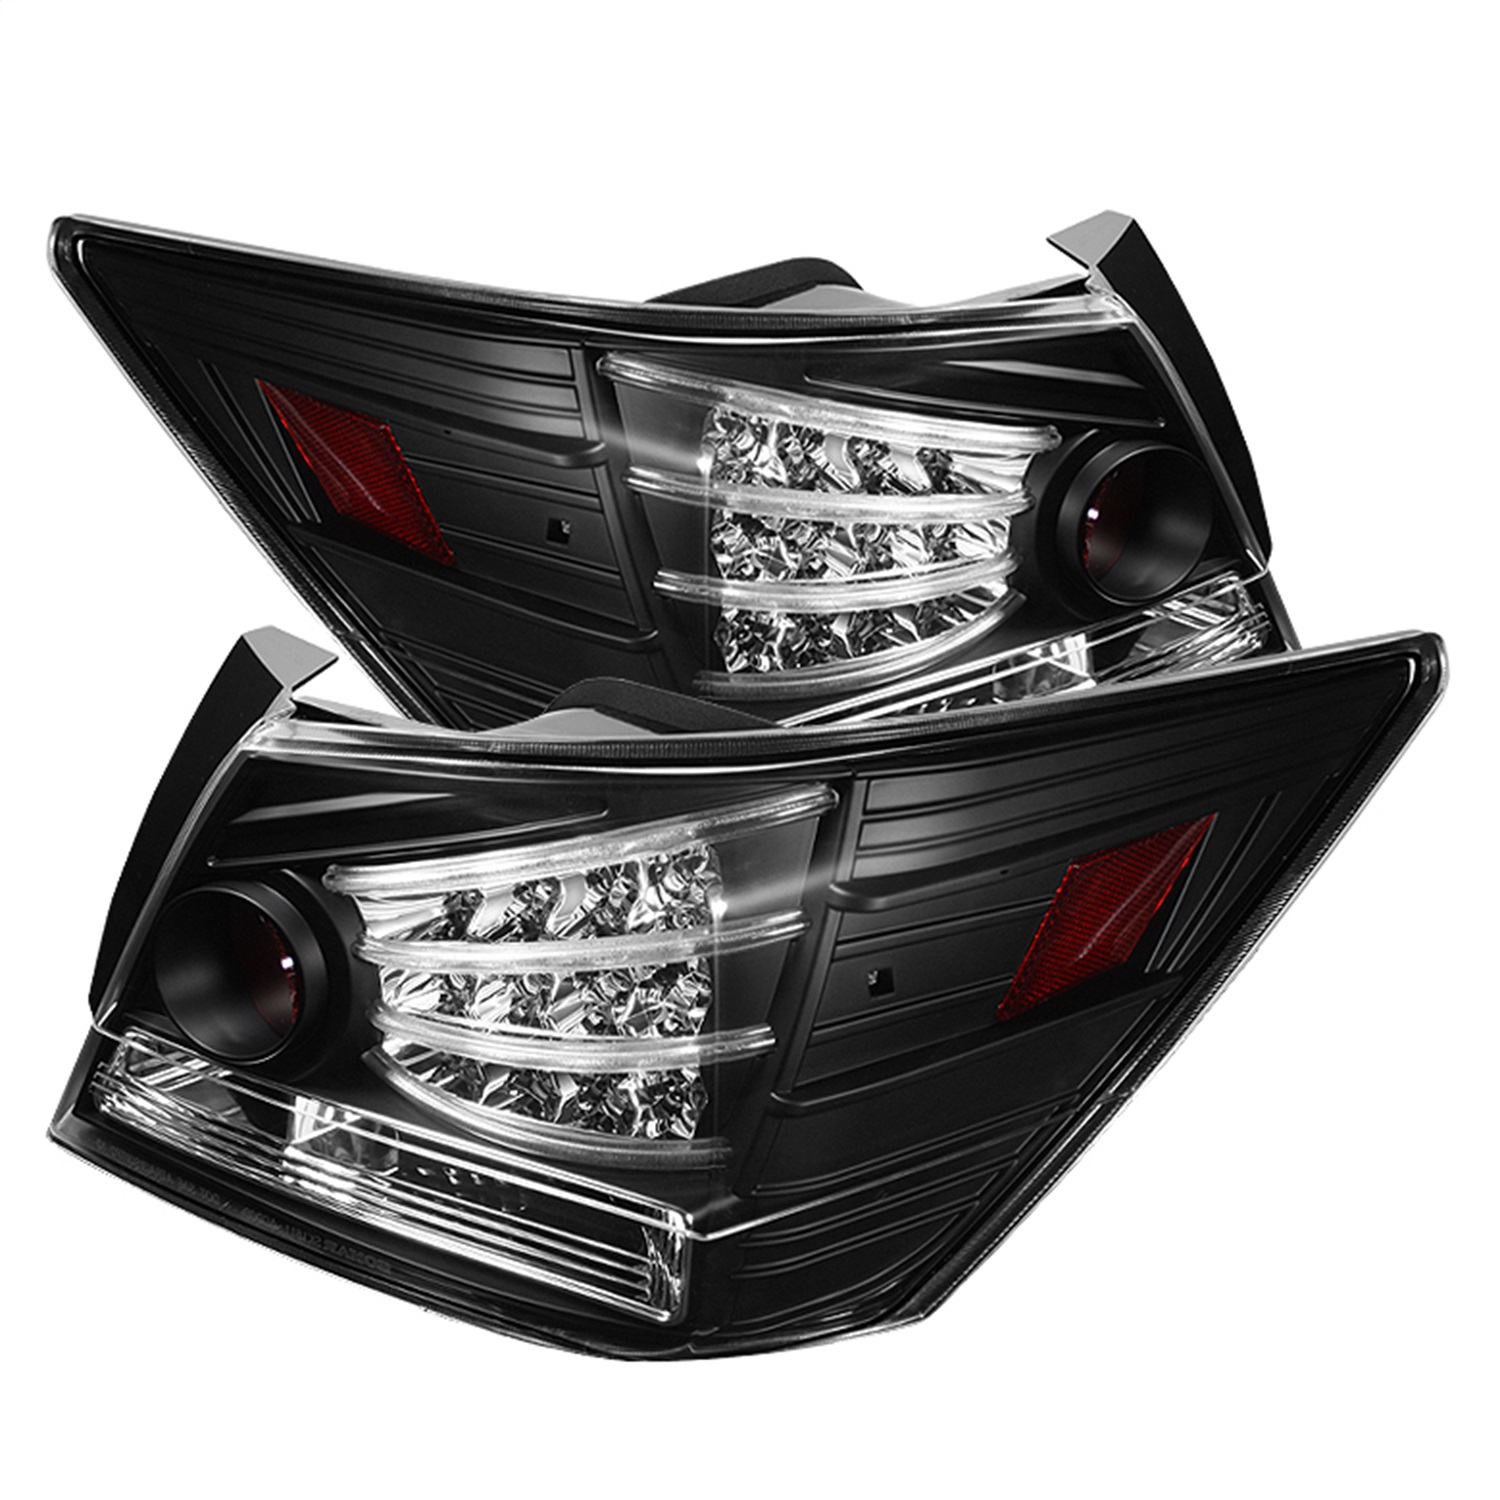 Spyder Auto 5032621 LED Tail Lights Fits 08-12 Accord